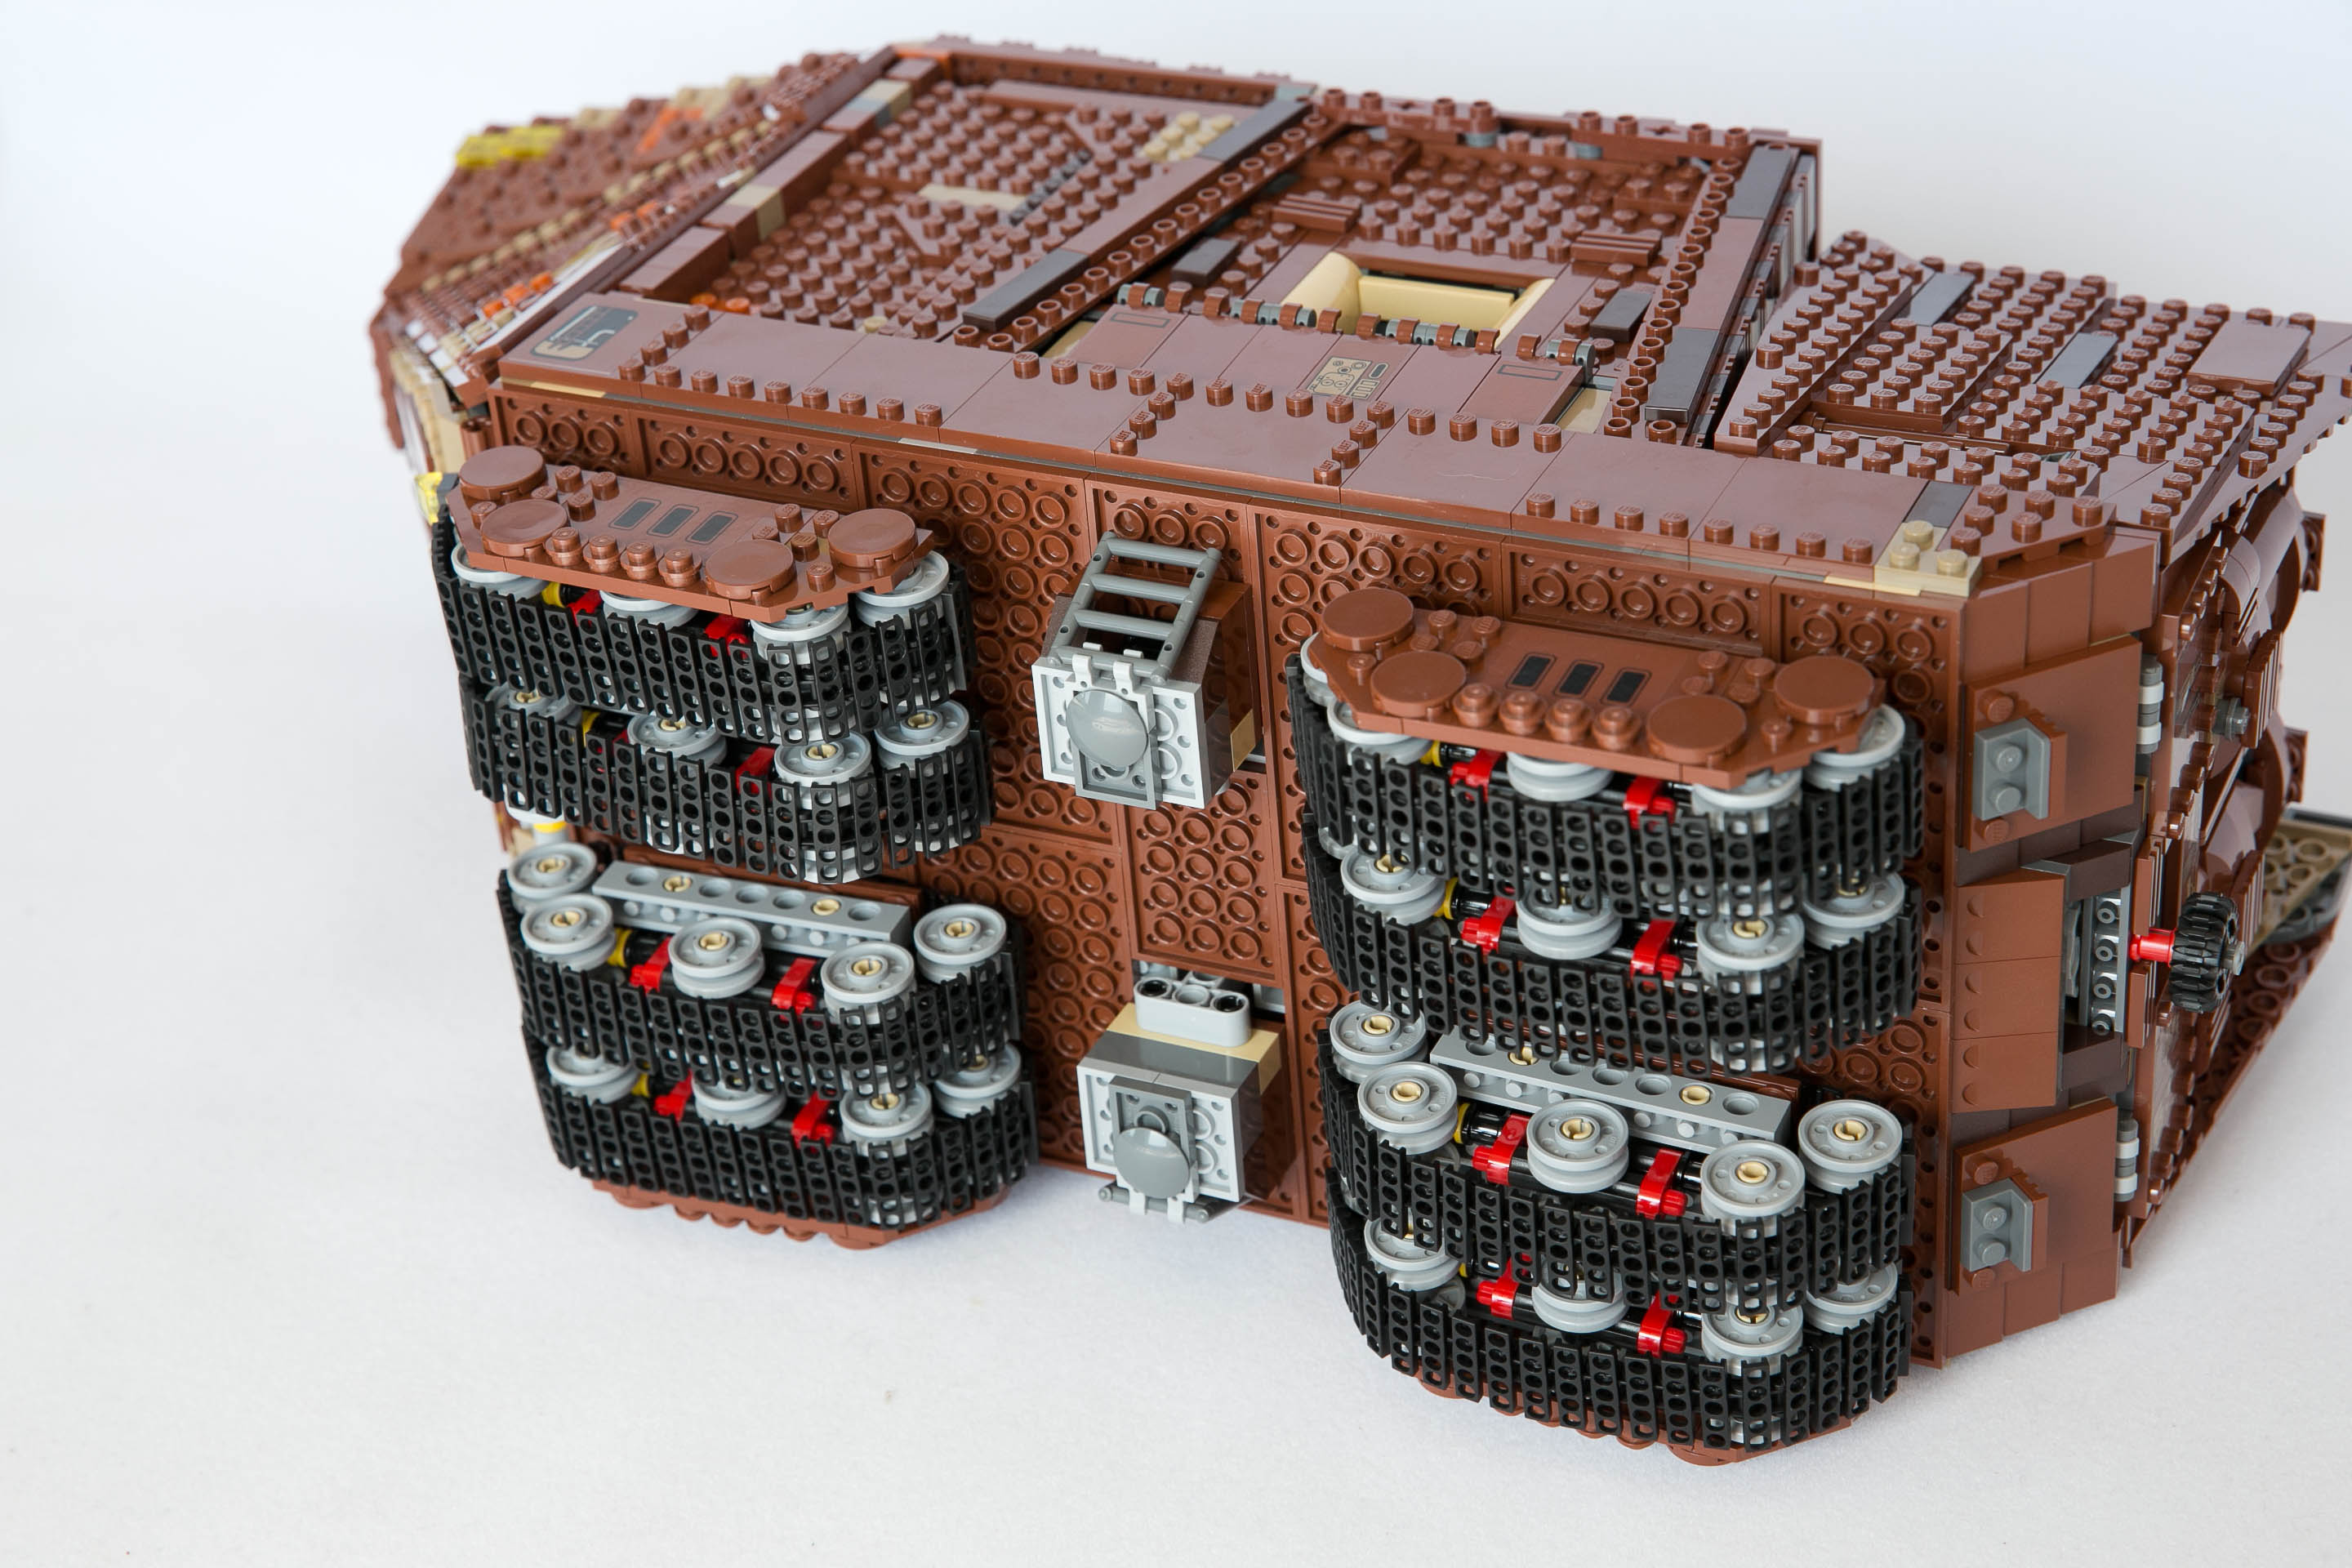 LEGO Star Wars Forum | From Bricks To Bothans • View topic - Review